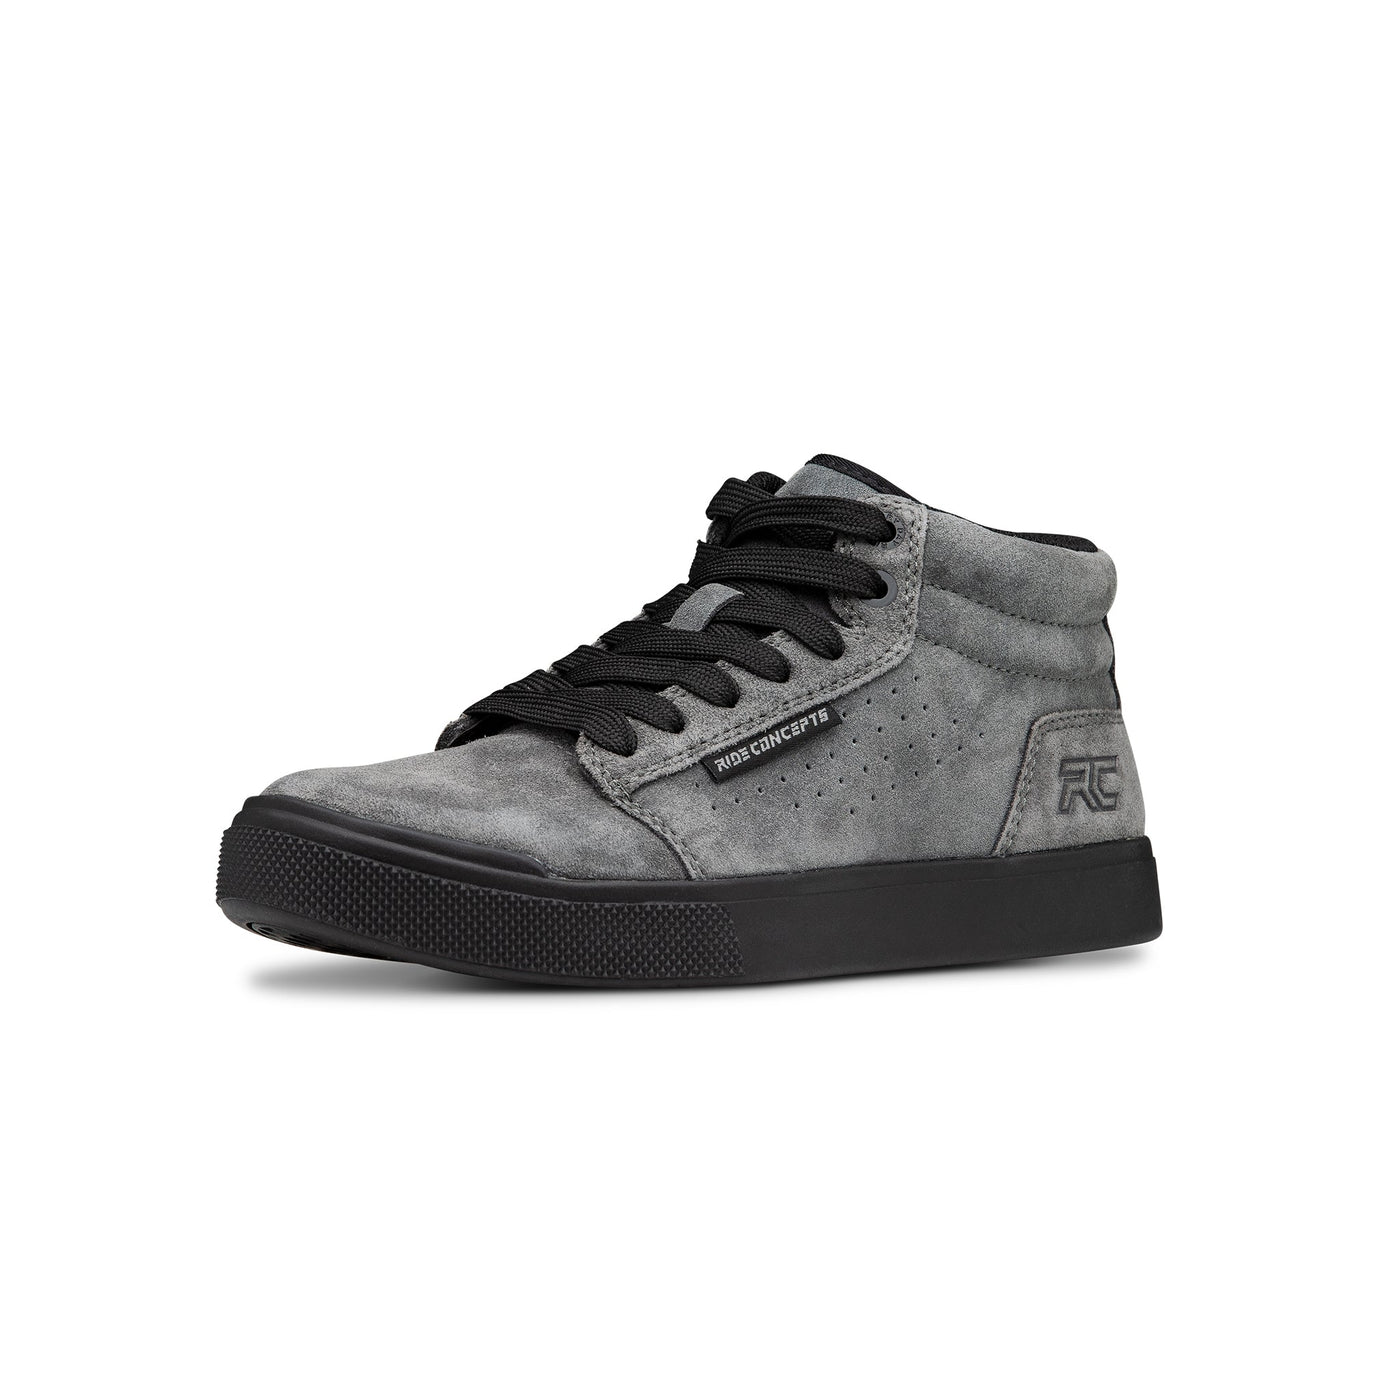 Ride Concepts Youth Vice Mid MTB Shoe - Charcoal and Black